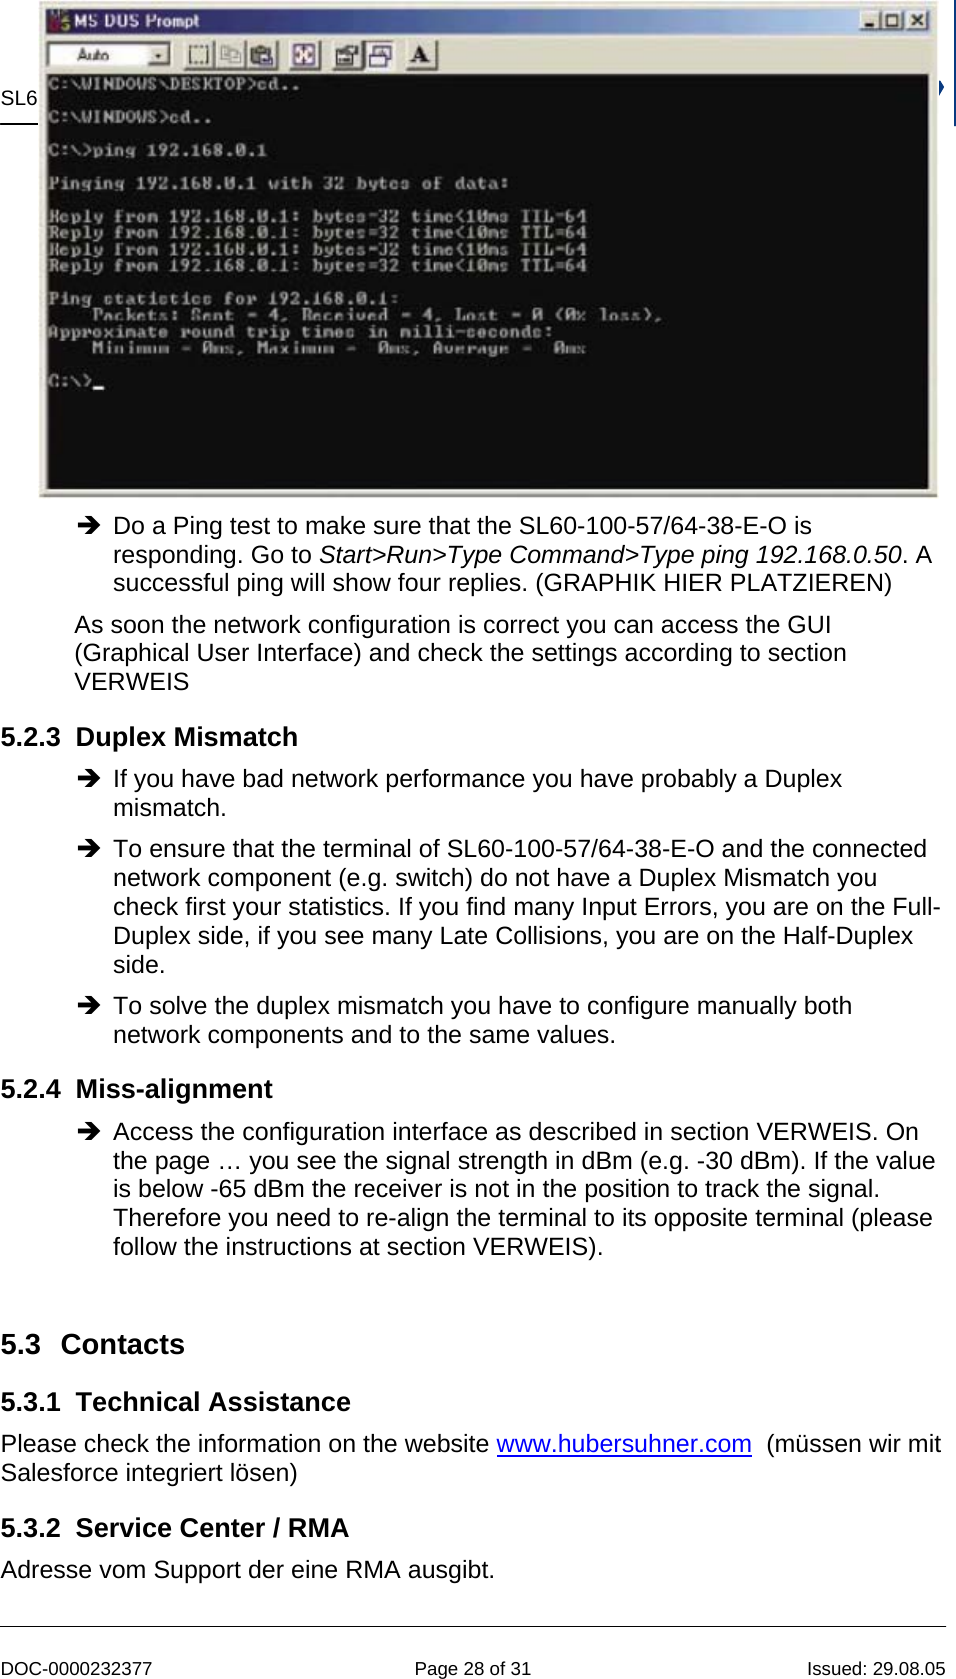 SL60-100-57/64-38-E-O  -  Installation and Service Manual   DOC-0000232377  Page 28 of 31  Issued: 29.08.05 Î Do a Ping test to make sure that the SL60-100-57/64-38-E-O is responding. Go to Start&gt;Run&gt;Type Command&gt;Type ping 192.168.0.50. A successful ping will show four replies. (GRAPHIK HIER PLATZIEREN) As soon the network configuration is correct you can access the GUI (Graphical User Interface) and check the settings according to section VERWEIS 5.2.3 Duplex Mismatch Î If you have bad network performance you have probably a Duplex mismatch. Î To ensure that the terminal of SL60-100-57/64-38-E-O and the connected network component (e.g. switch) do not have a Duplex Mismatch you check first your statistics. If you find many Input Errors, you are on the Full-Duplex side, if you see many Late Collisions, you are on the Half-Duplex side. Î To solve the duplex mismatch you have to configure manually both network components and to the same values. 5.2.4 Miss-alignment Î Access the configuration interface as described in section VERWEIS. On the page … you see the signal strength in dBm (e.g. -30 dBm). If the value is below -65 dBm the receiver is not in the position to track the signal. Therefore you need to re-align the terminal to its opposite terminal (please follow the instructions at section VERWEIS).   5.3 Contacts 5.3.1 Technical Assistance Please check the information on the website www.hubersuhner.com  (müssen wir mit Salesforce integriert lösen) 5.3.2  Service Center / RMA Adresse vom Support der eine RMA ausgibt. 